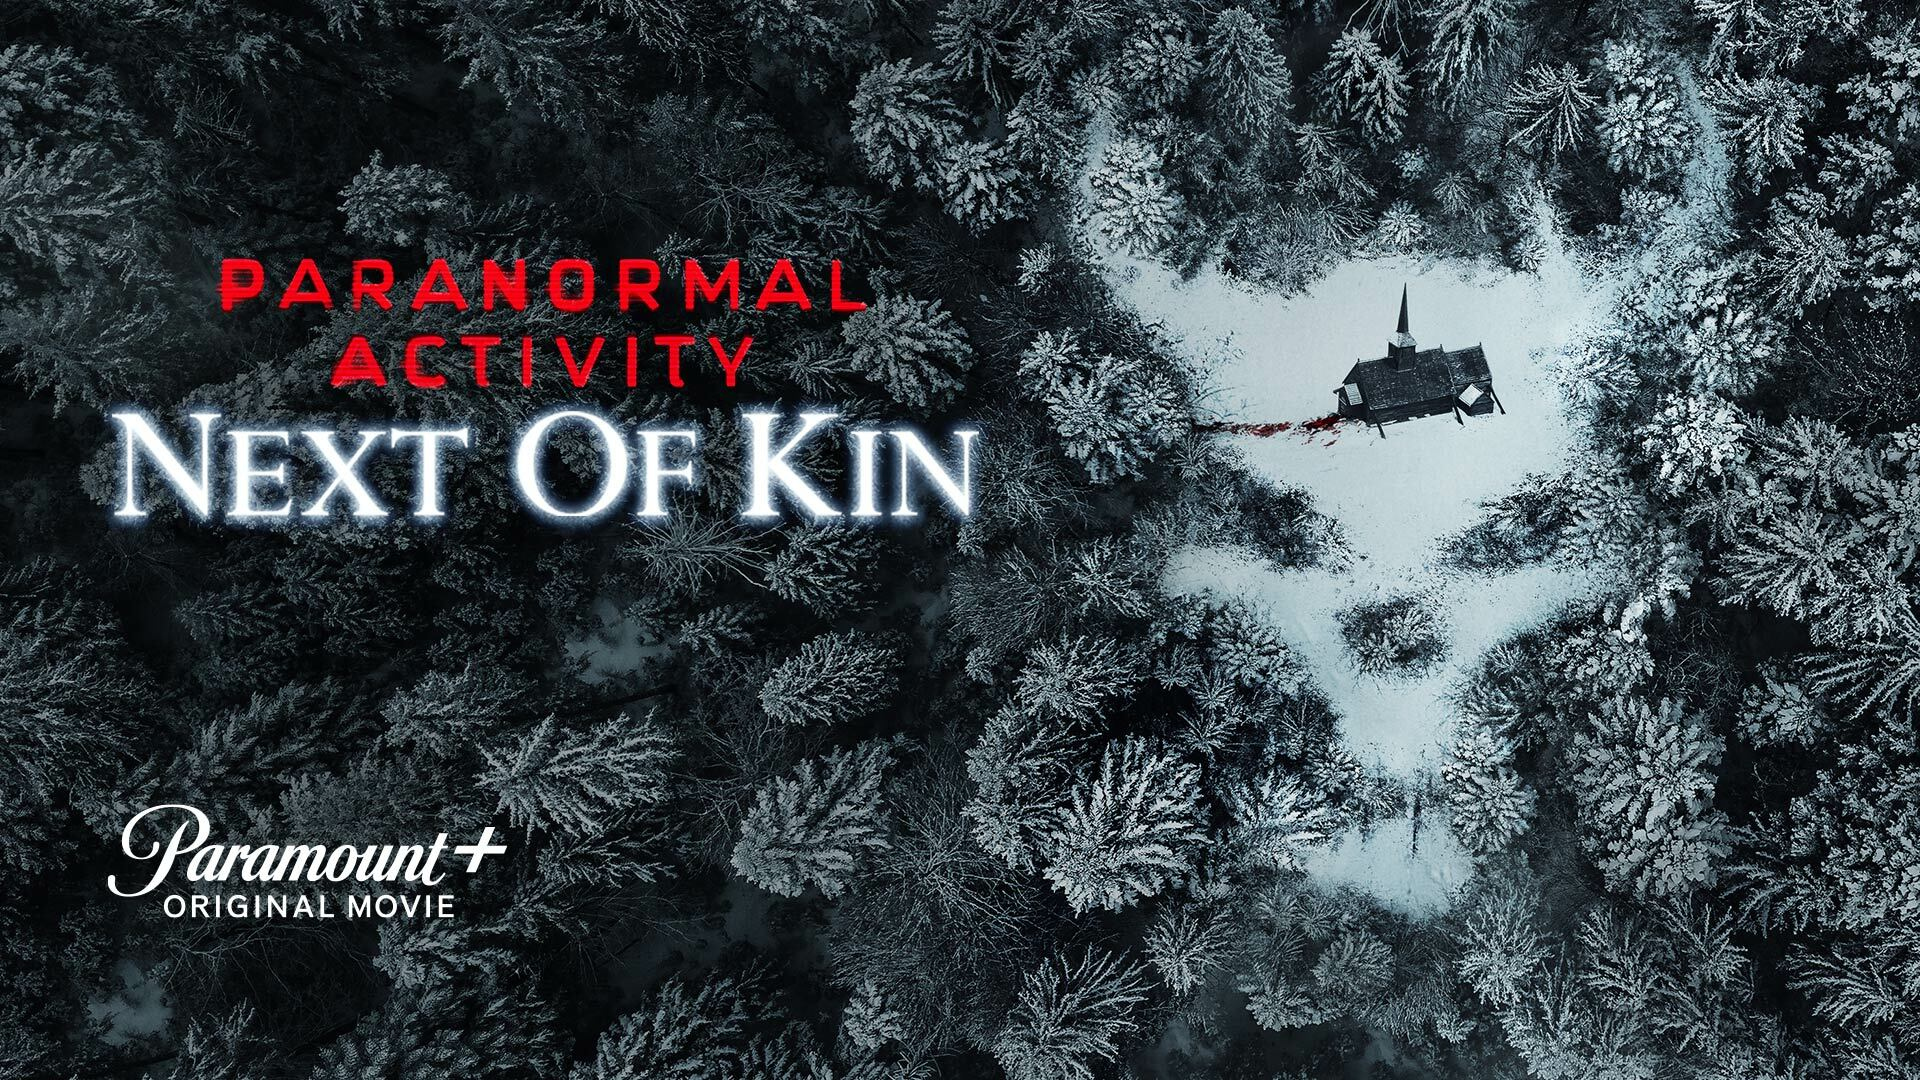 Watch Paranormal Activity: Next of Kin - Stream now on Paramount Plus